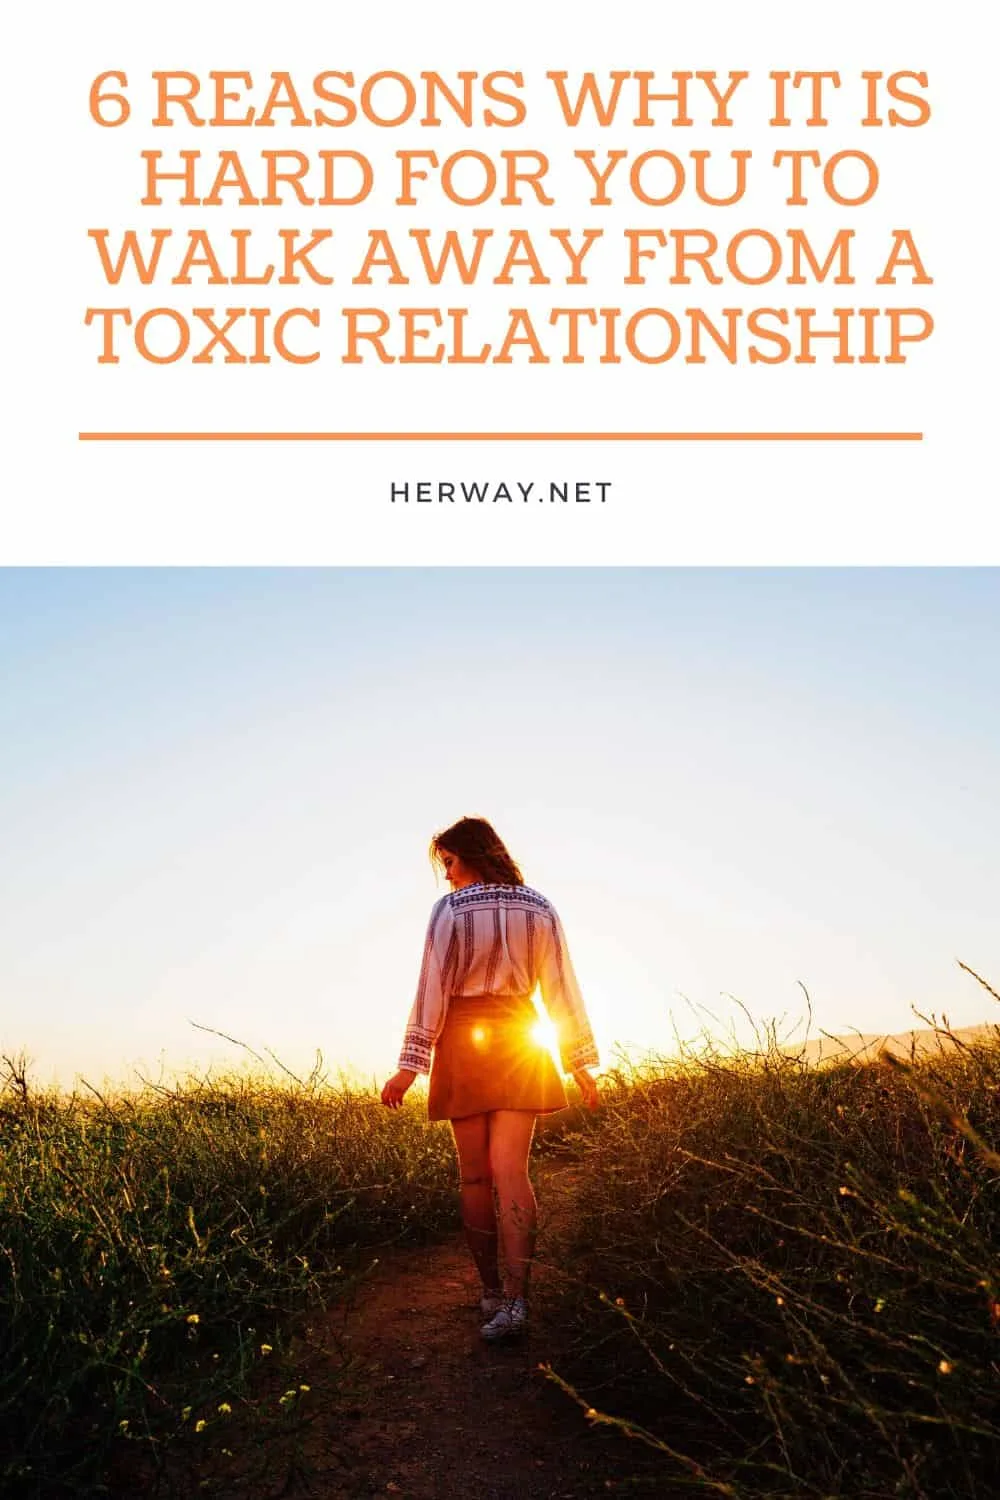 6 REASONS WHY IT IS HARD FOR YOU TO WALK AWAY FROM A TOXIC RELATIONSHIP